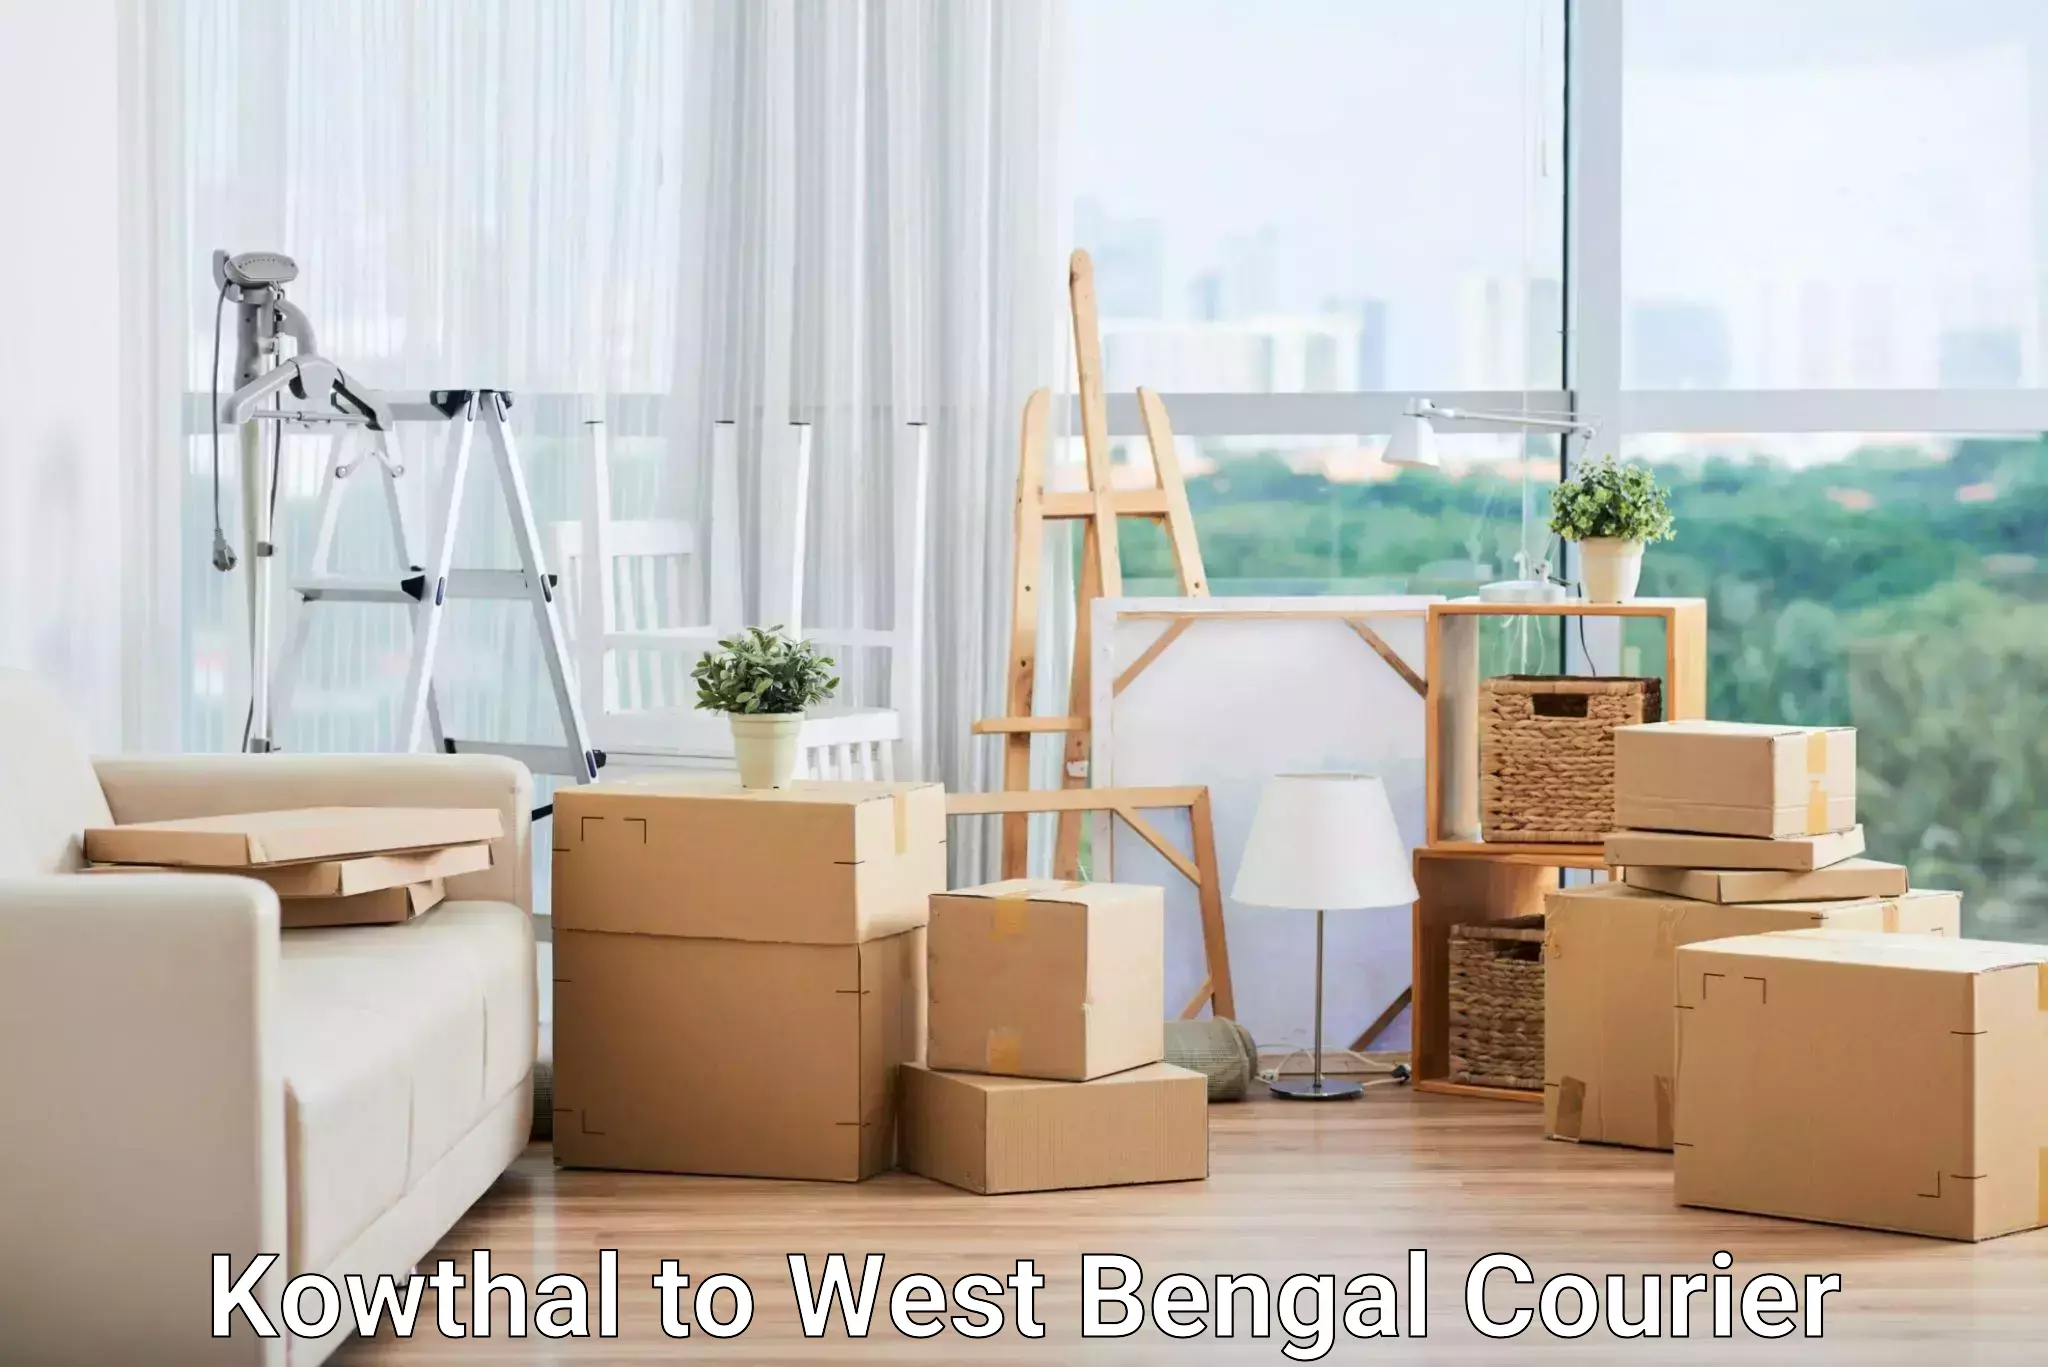 Express mail service Kowthal to West Bengal